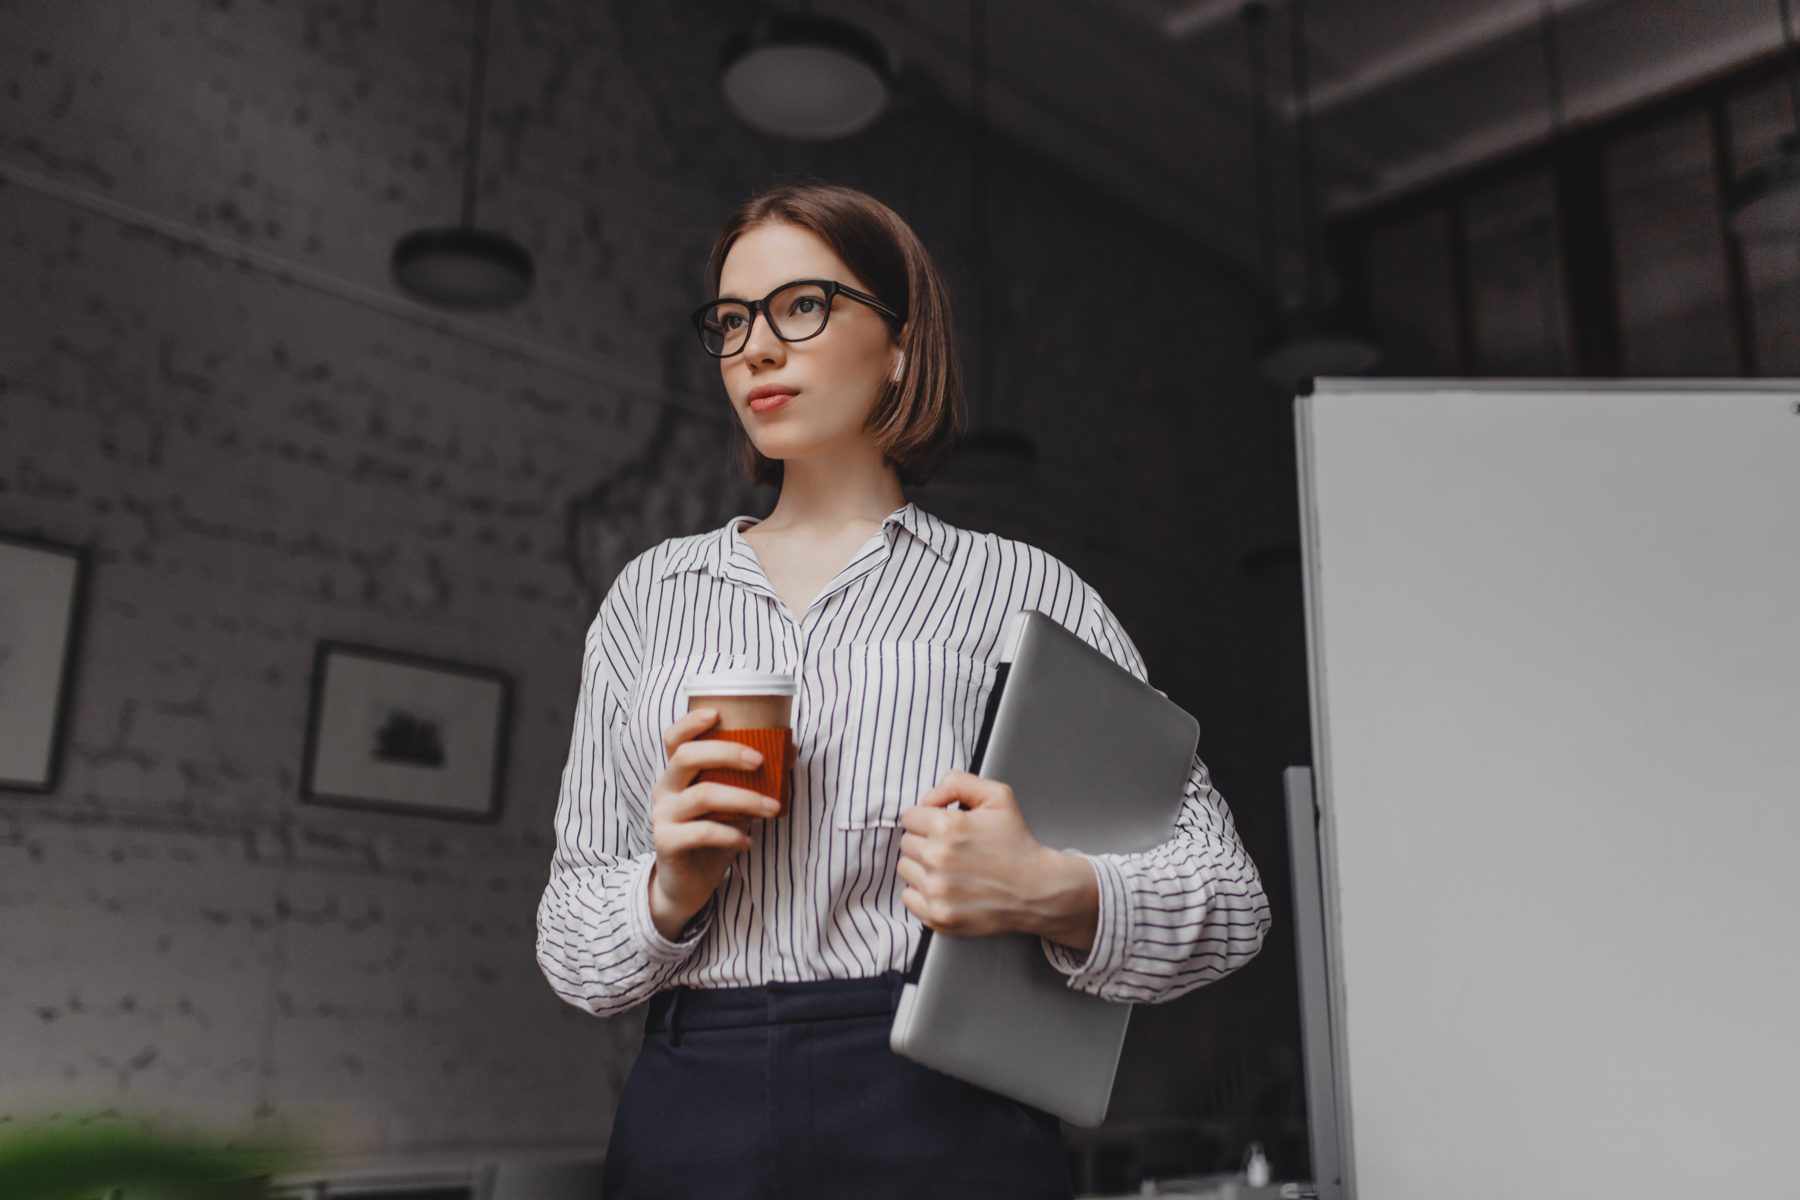 Portrait of intelligent woman in glasses holding cup of tea. Employee in stylish outfit posing with